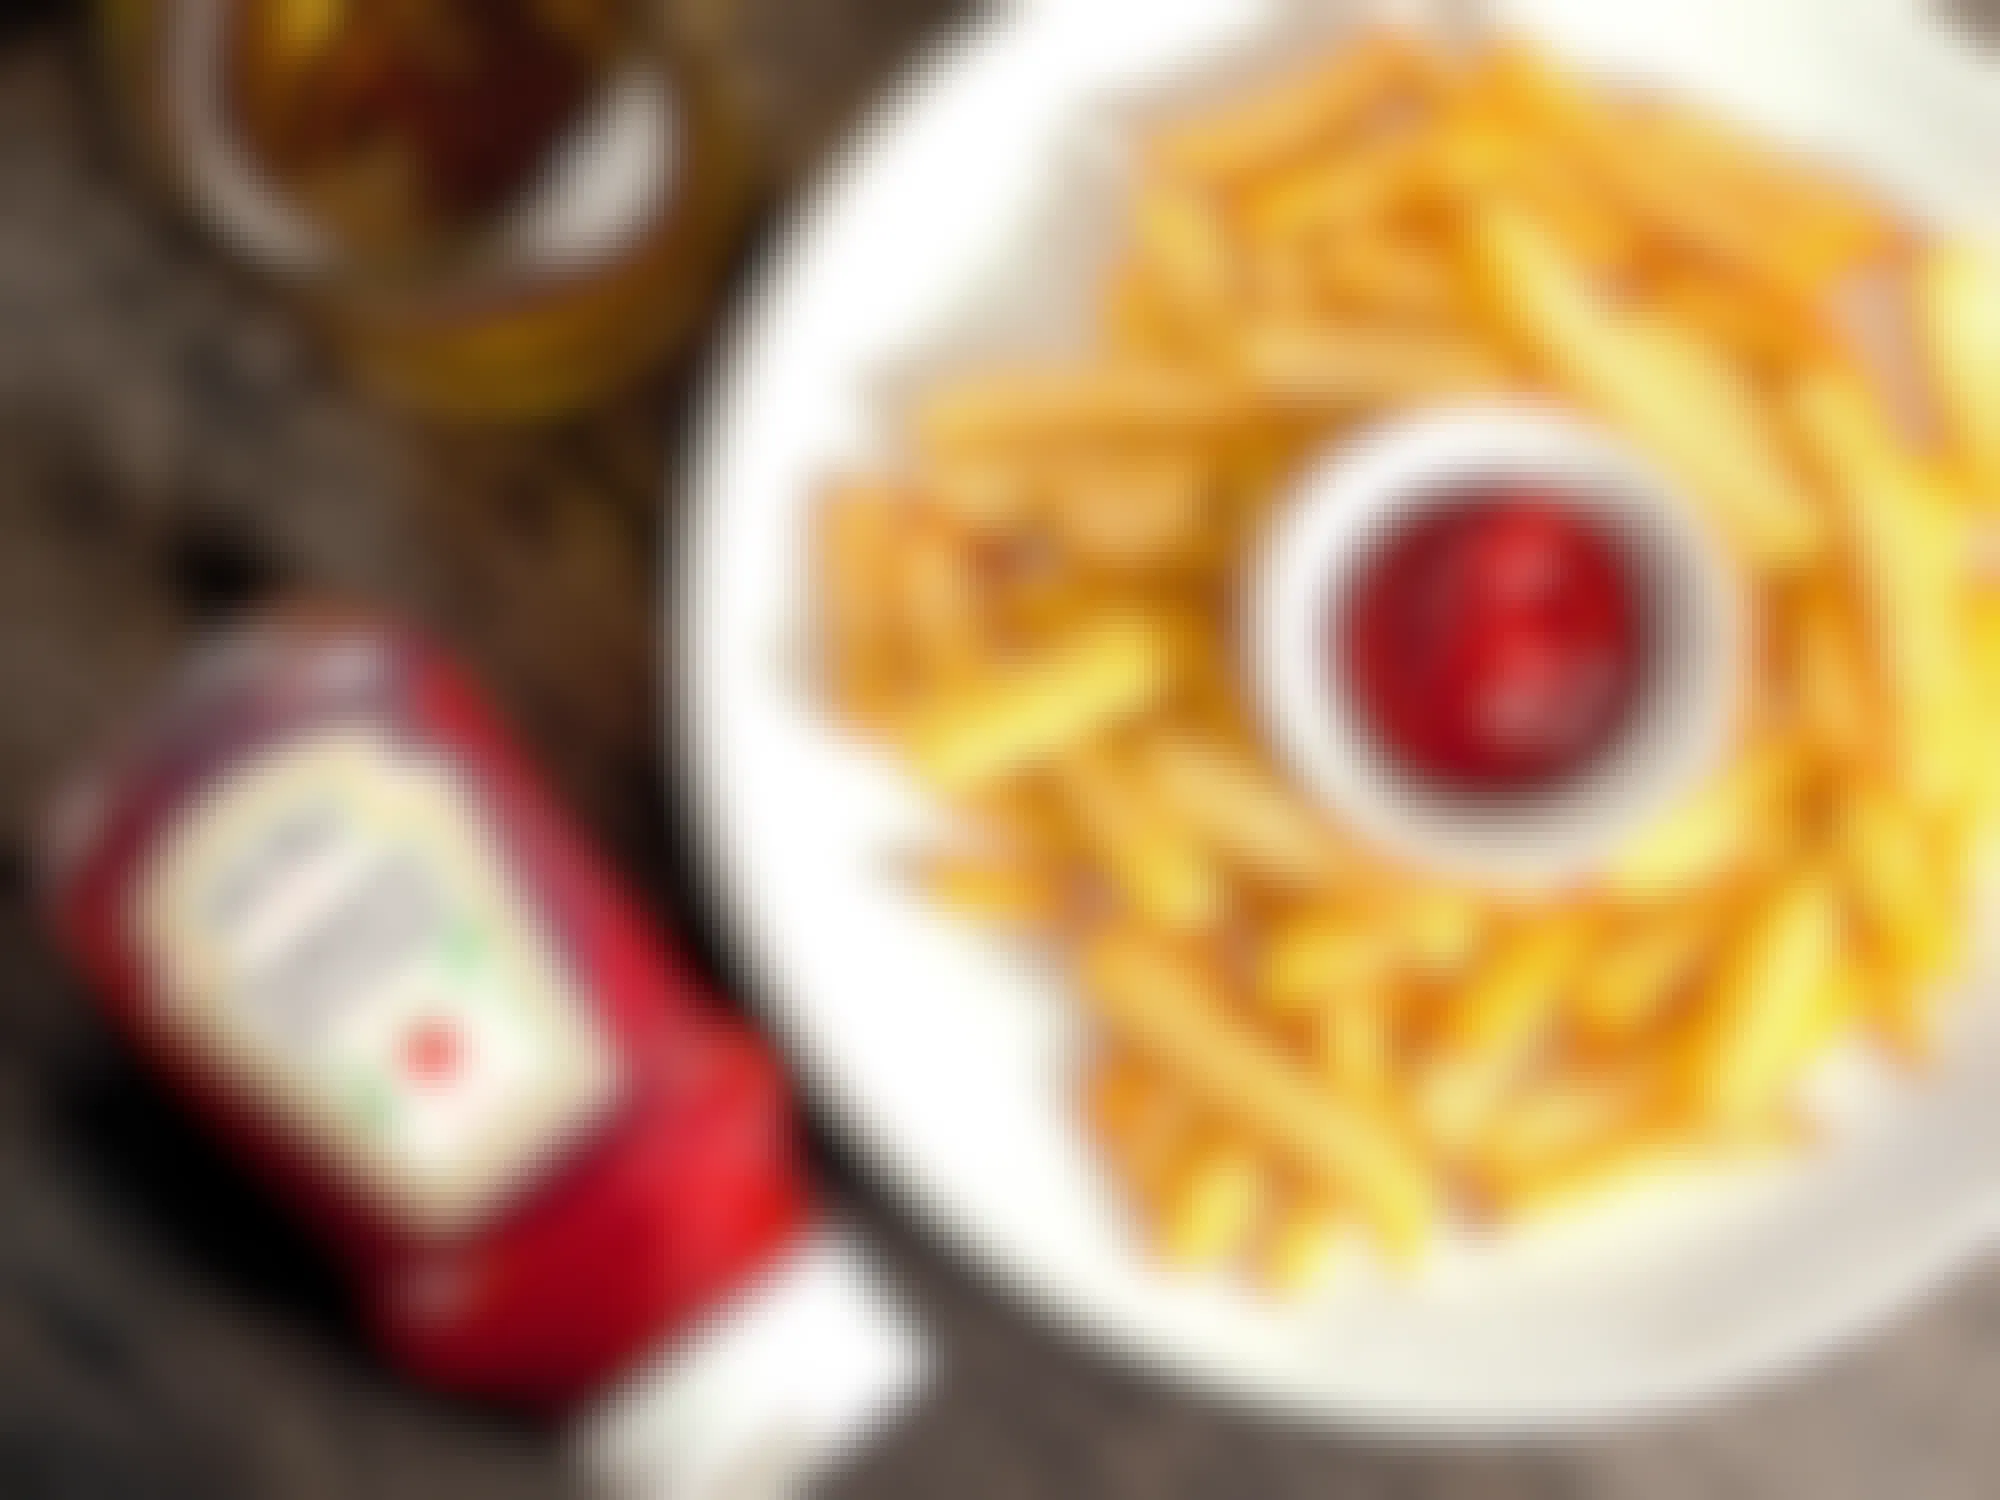 bottle of heinz ketchup and plate of french fries on table